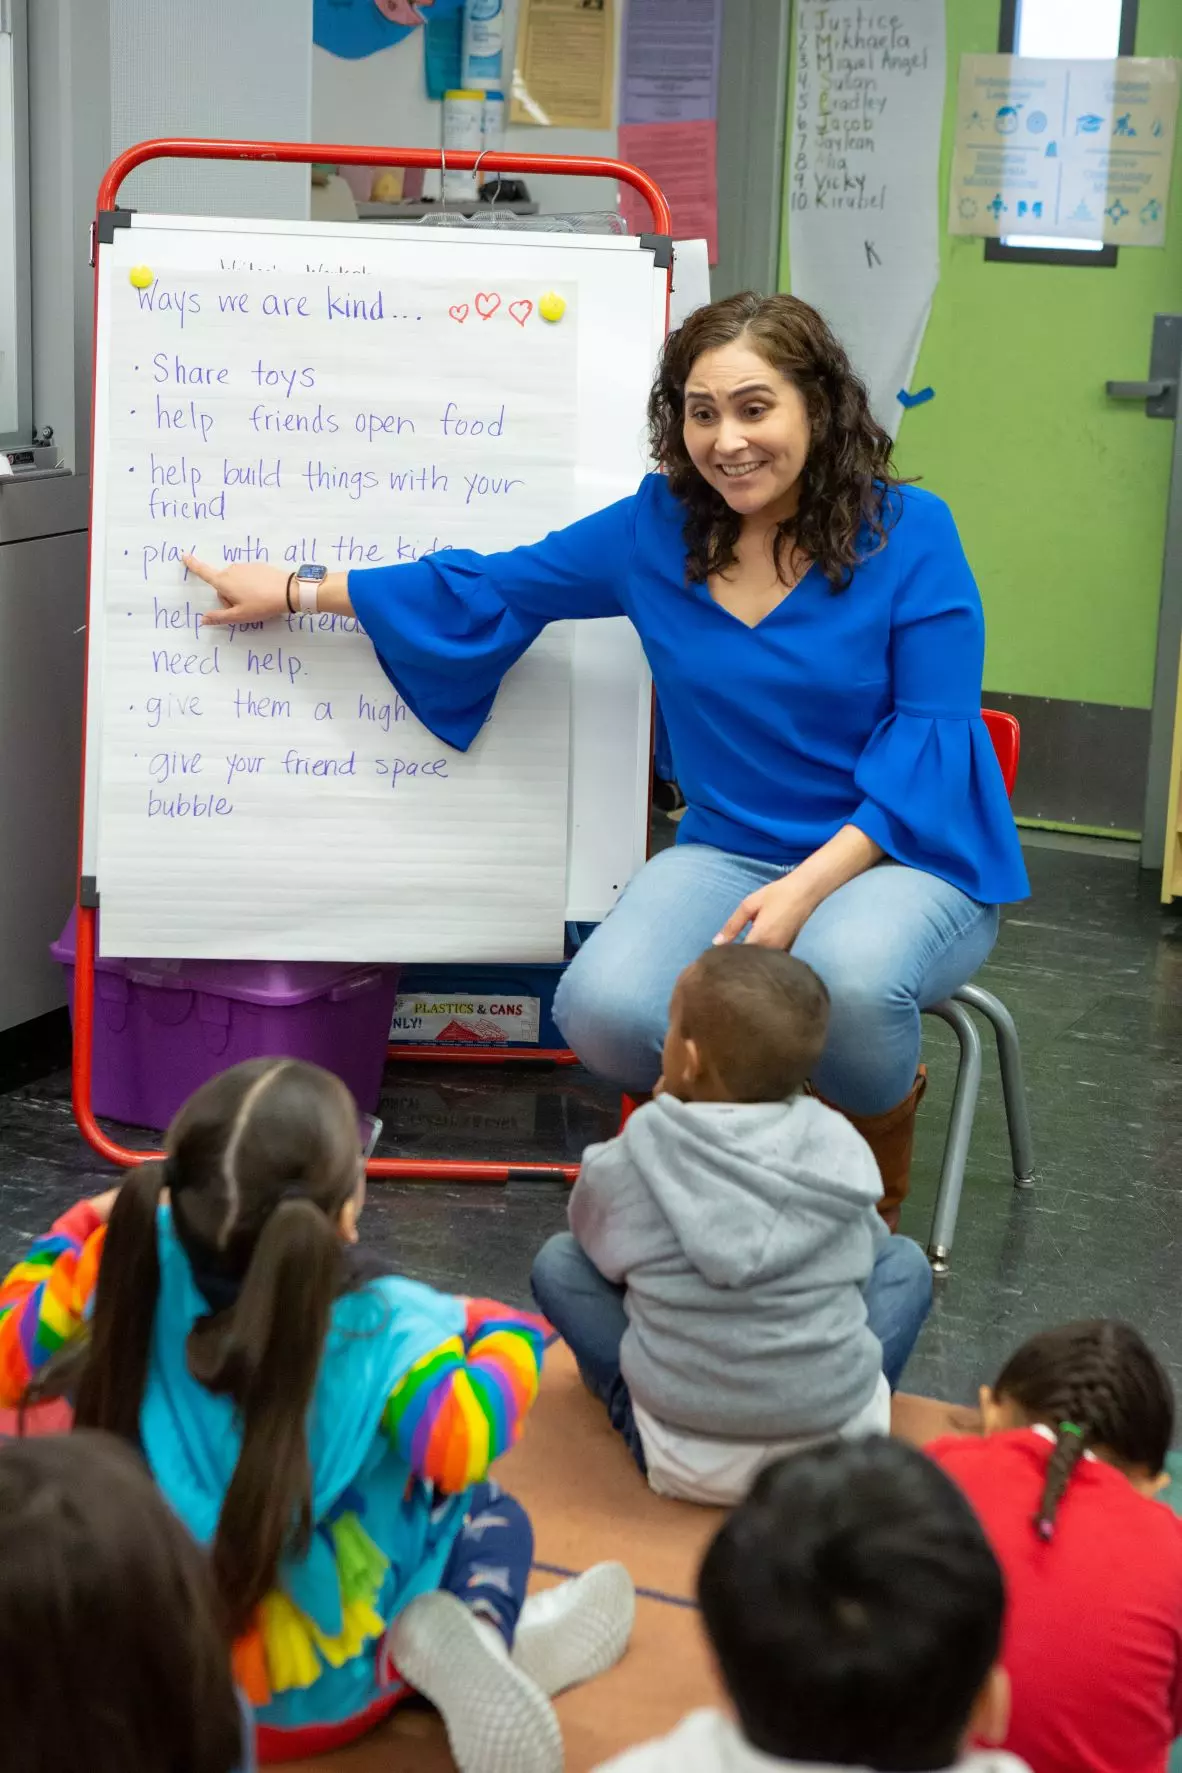 Preschool teacher sitting at whiteboard with kids on the floor looking up at her